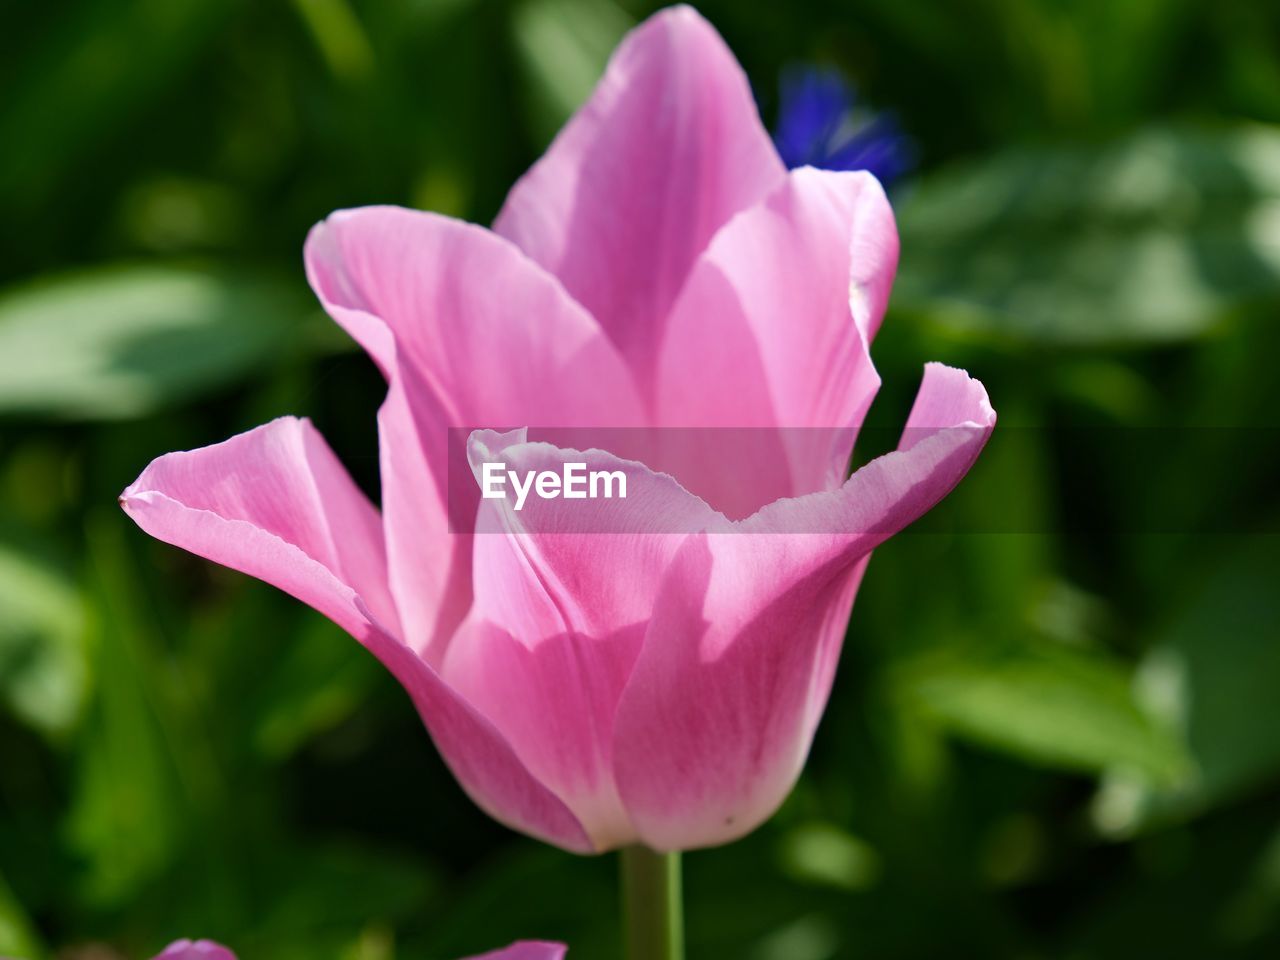 flower, flowering plant, plant, beauty in nature, freshness, pink, petal, close-up, nature, inflorescence, flower head, fragility, leaf, plant part, aquatic plant, no people, growth, focus on foreground, macro photography, water lily, water, springtime, outdoors, blossom, lily, magenta, lotus water lily, pond, day